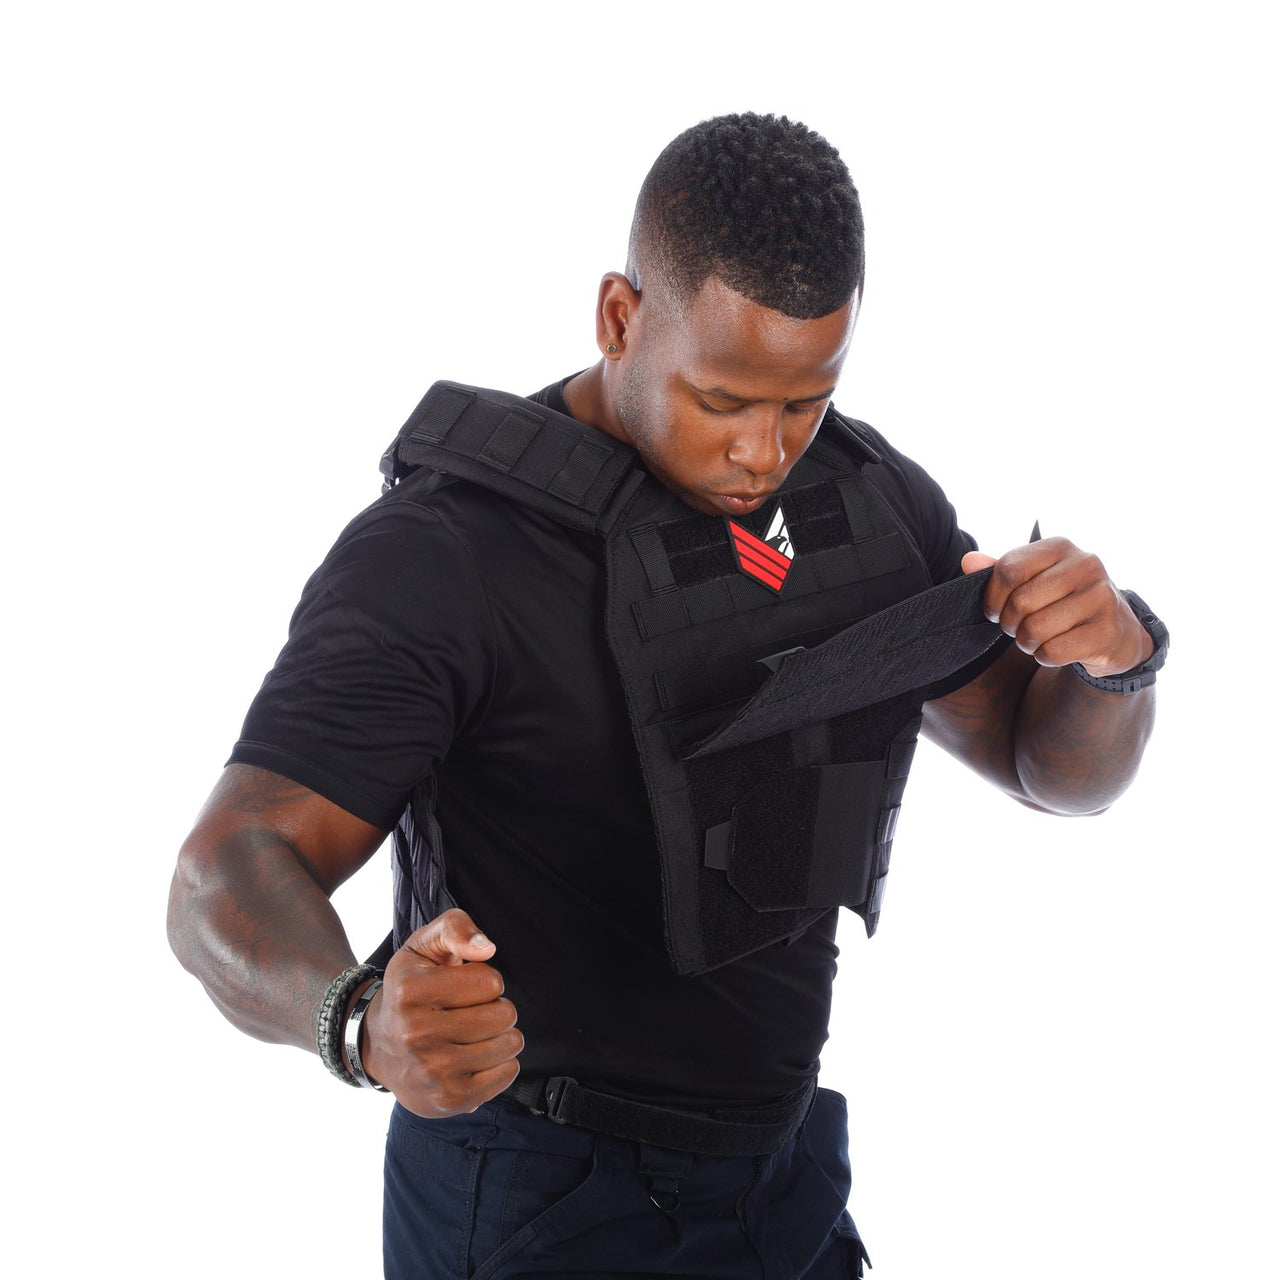 A man in a black vest is holding his Body Armor Direct Advanced Body Armor Plate Carrier with Cummerbund.